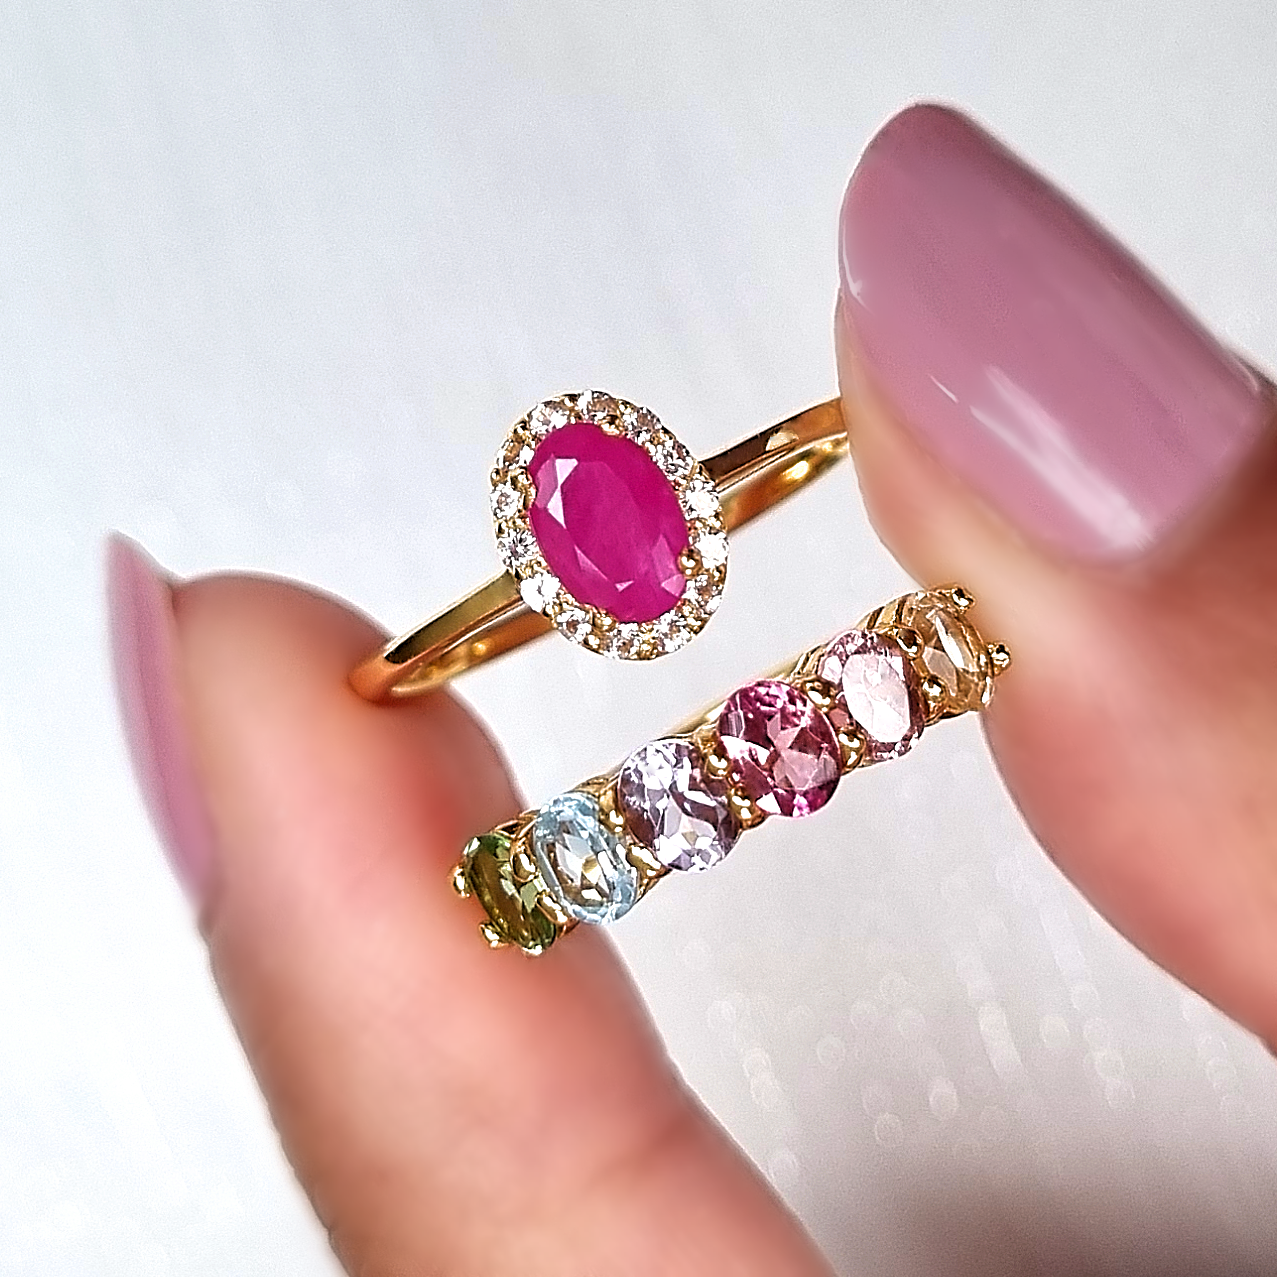  oval cut pinkish red gemstone and white topaz and oval cut rainbow colour gemstone ring in 18k gold vermeil.